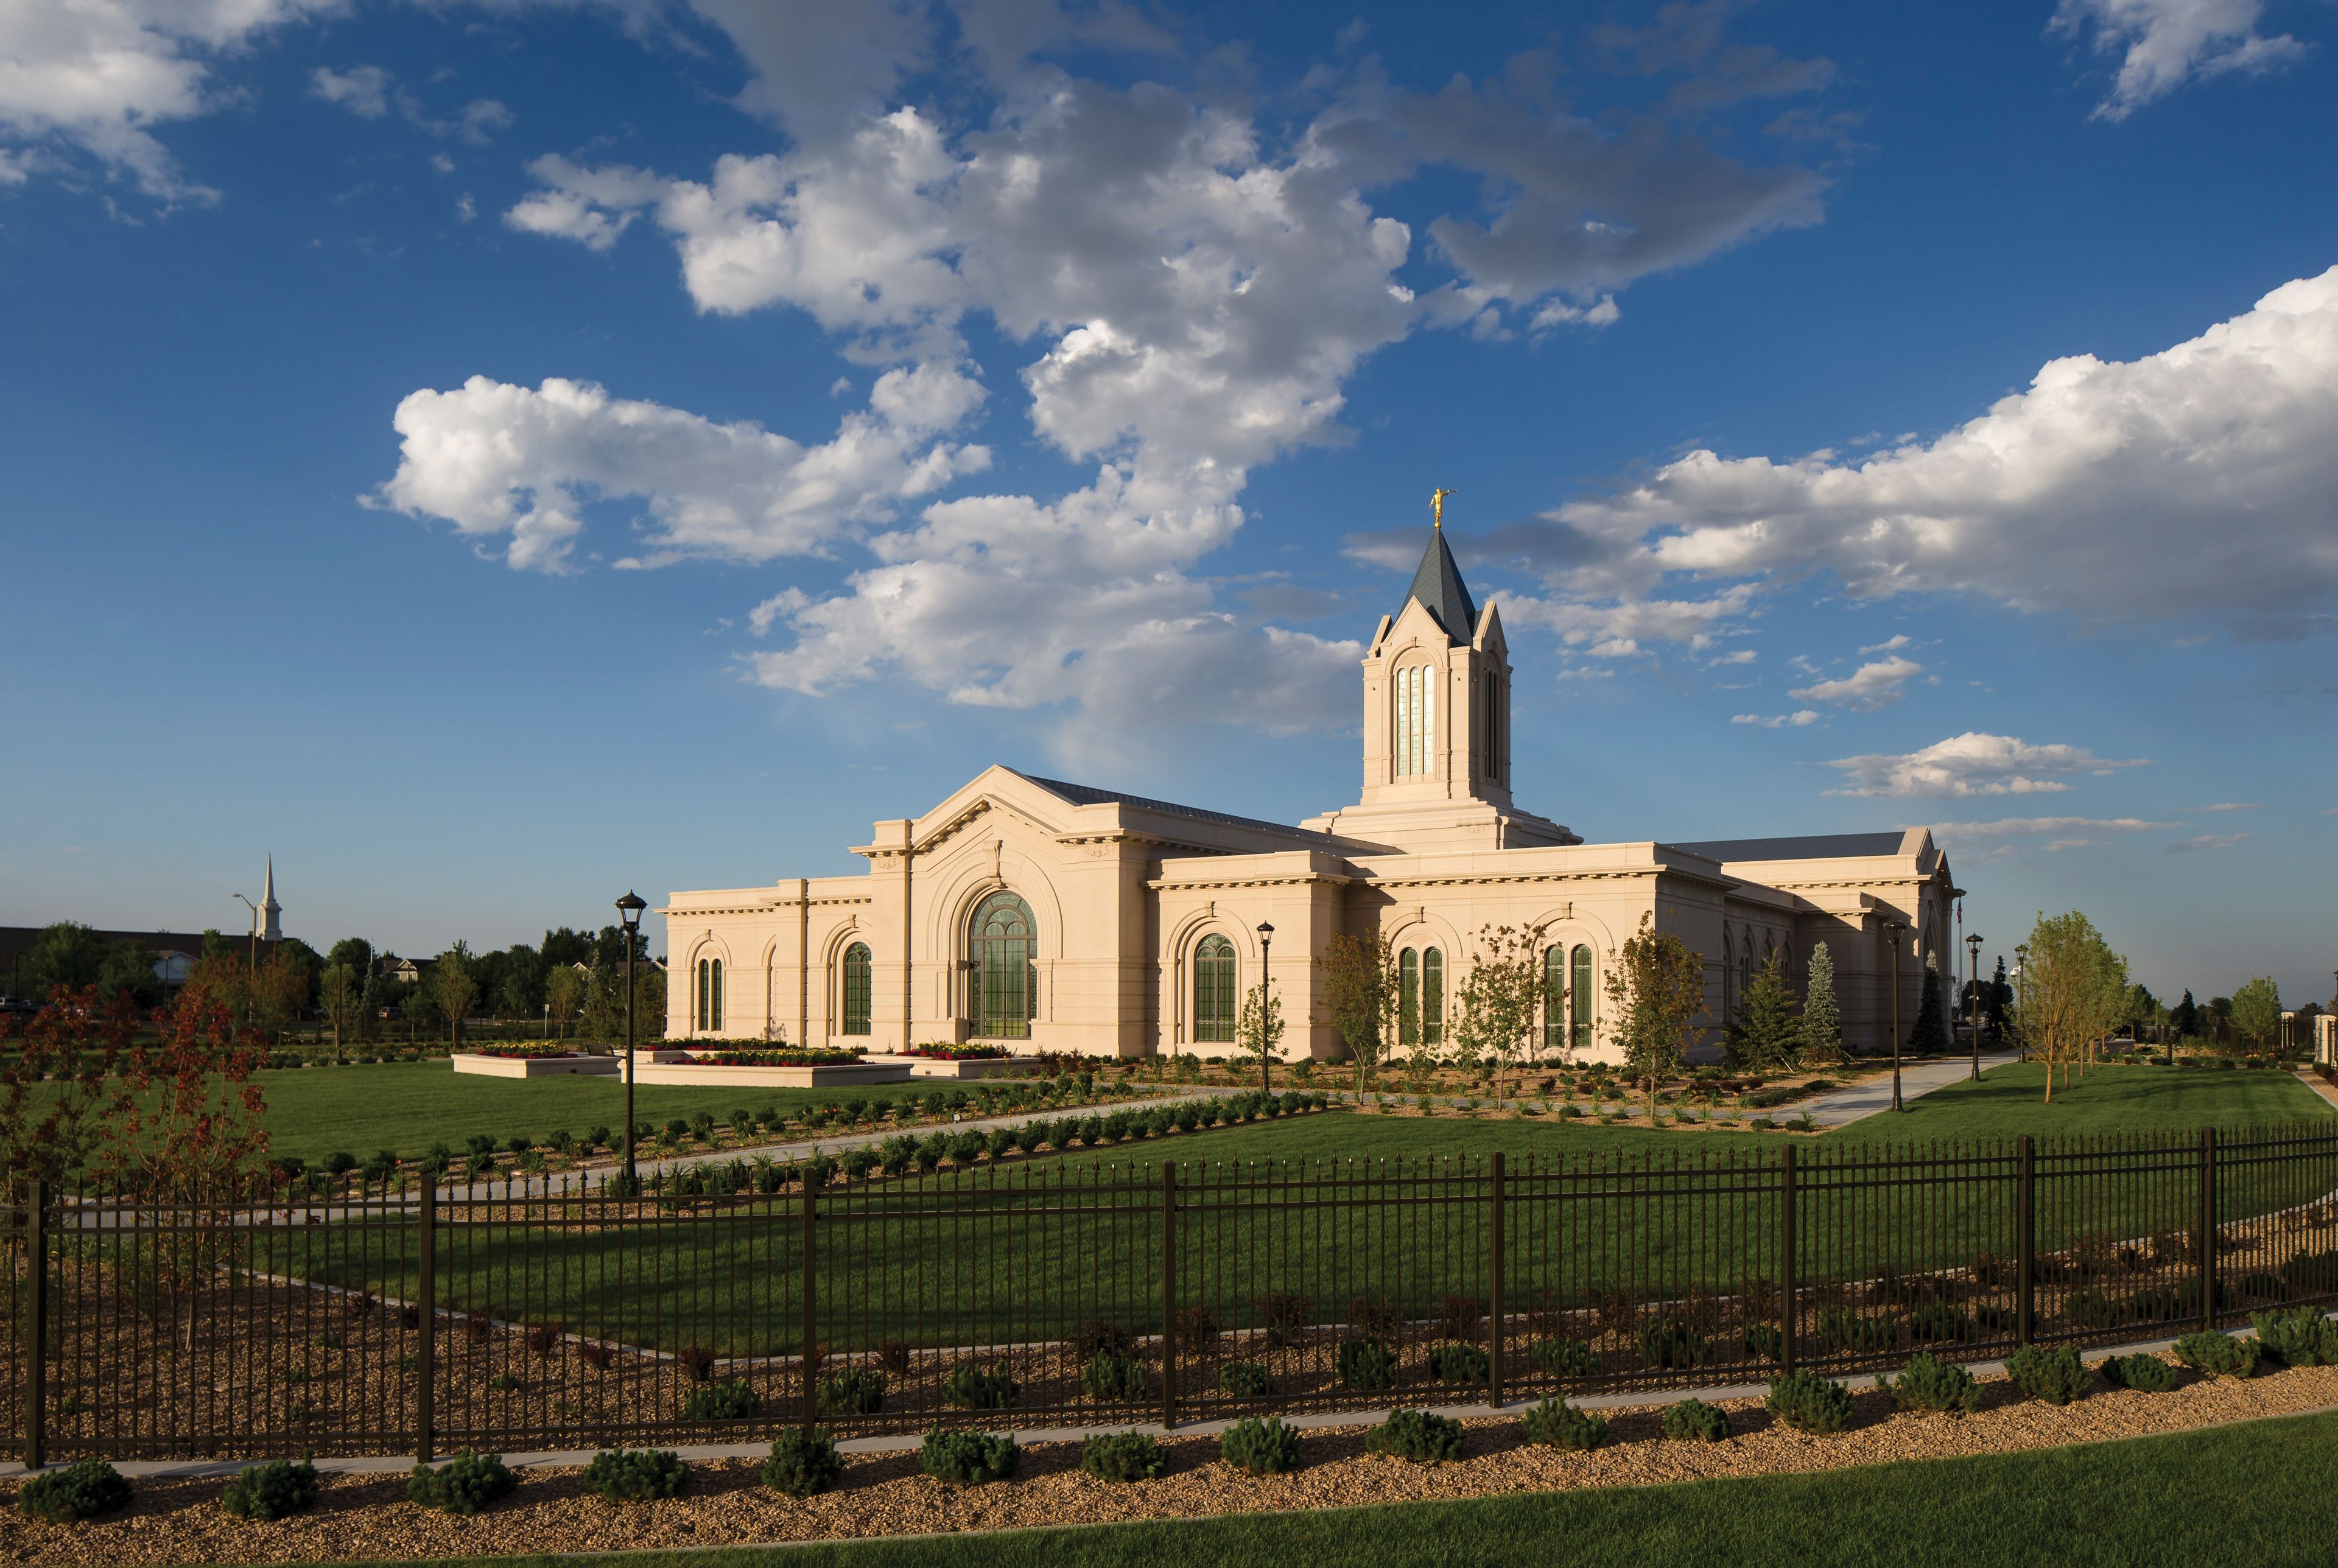 An exterior view of the Fort Collins Colorado Temple during the day.